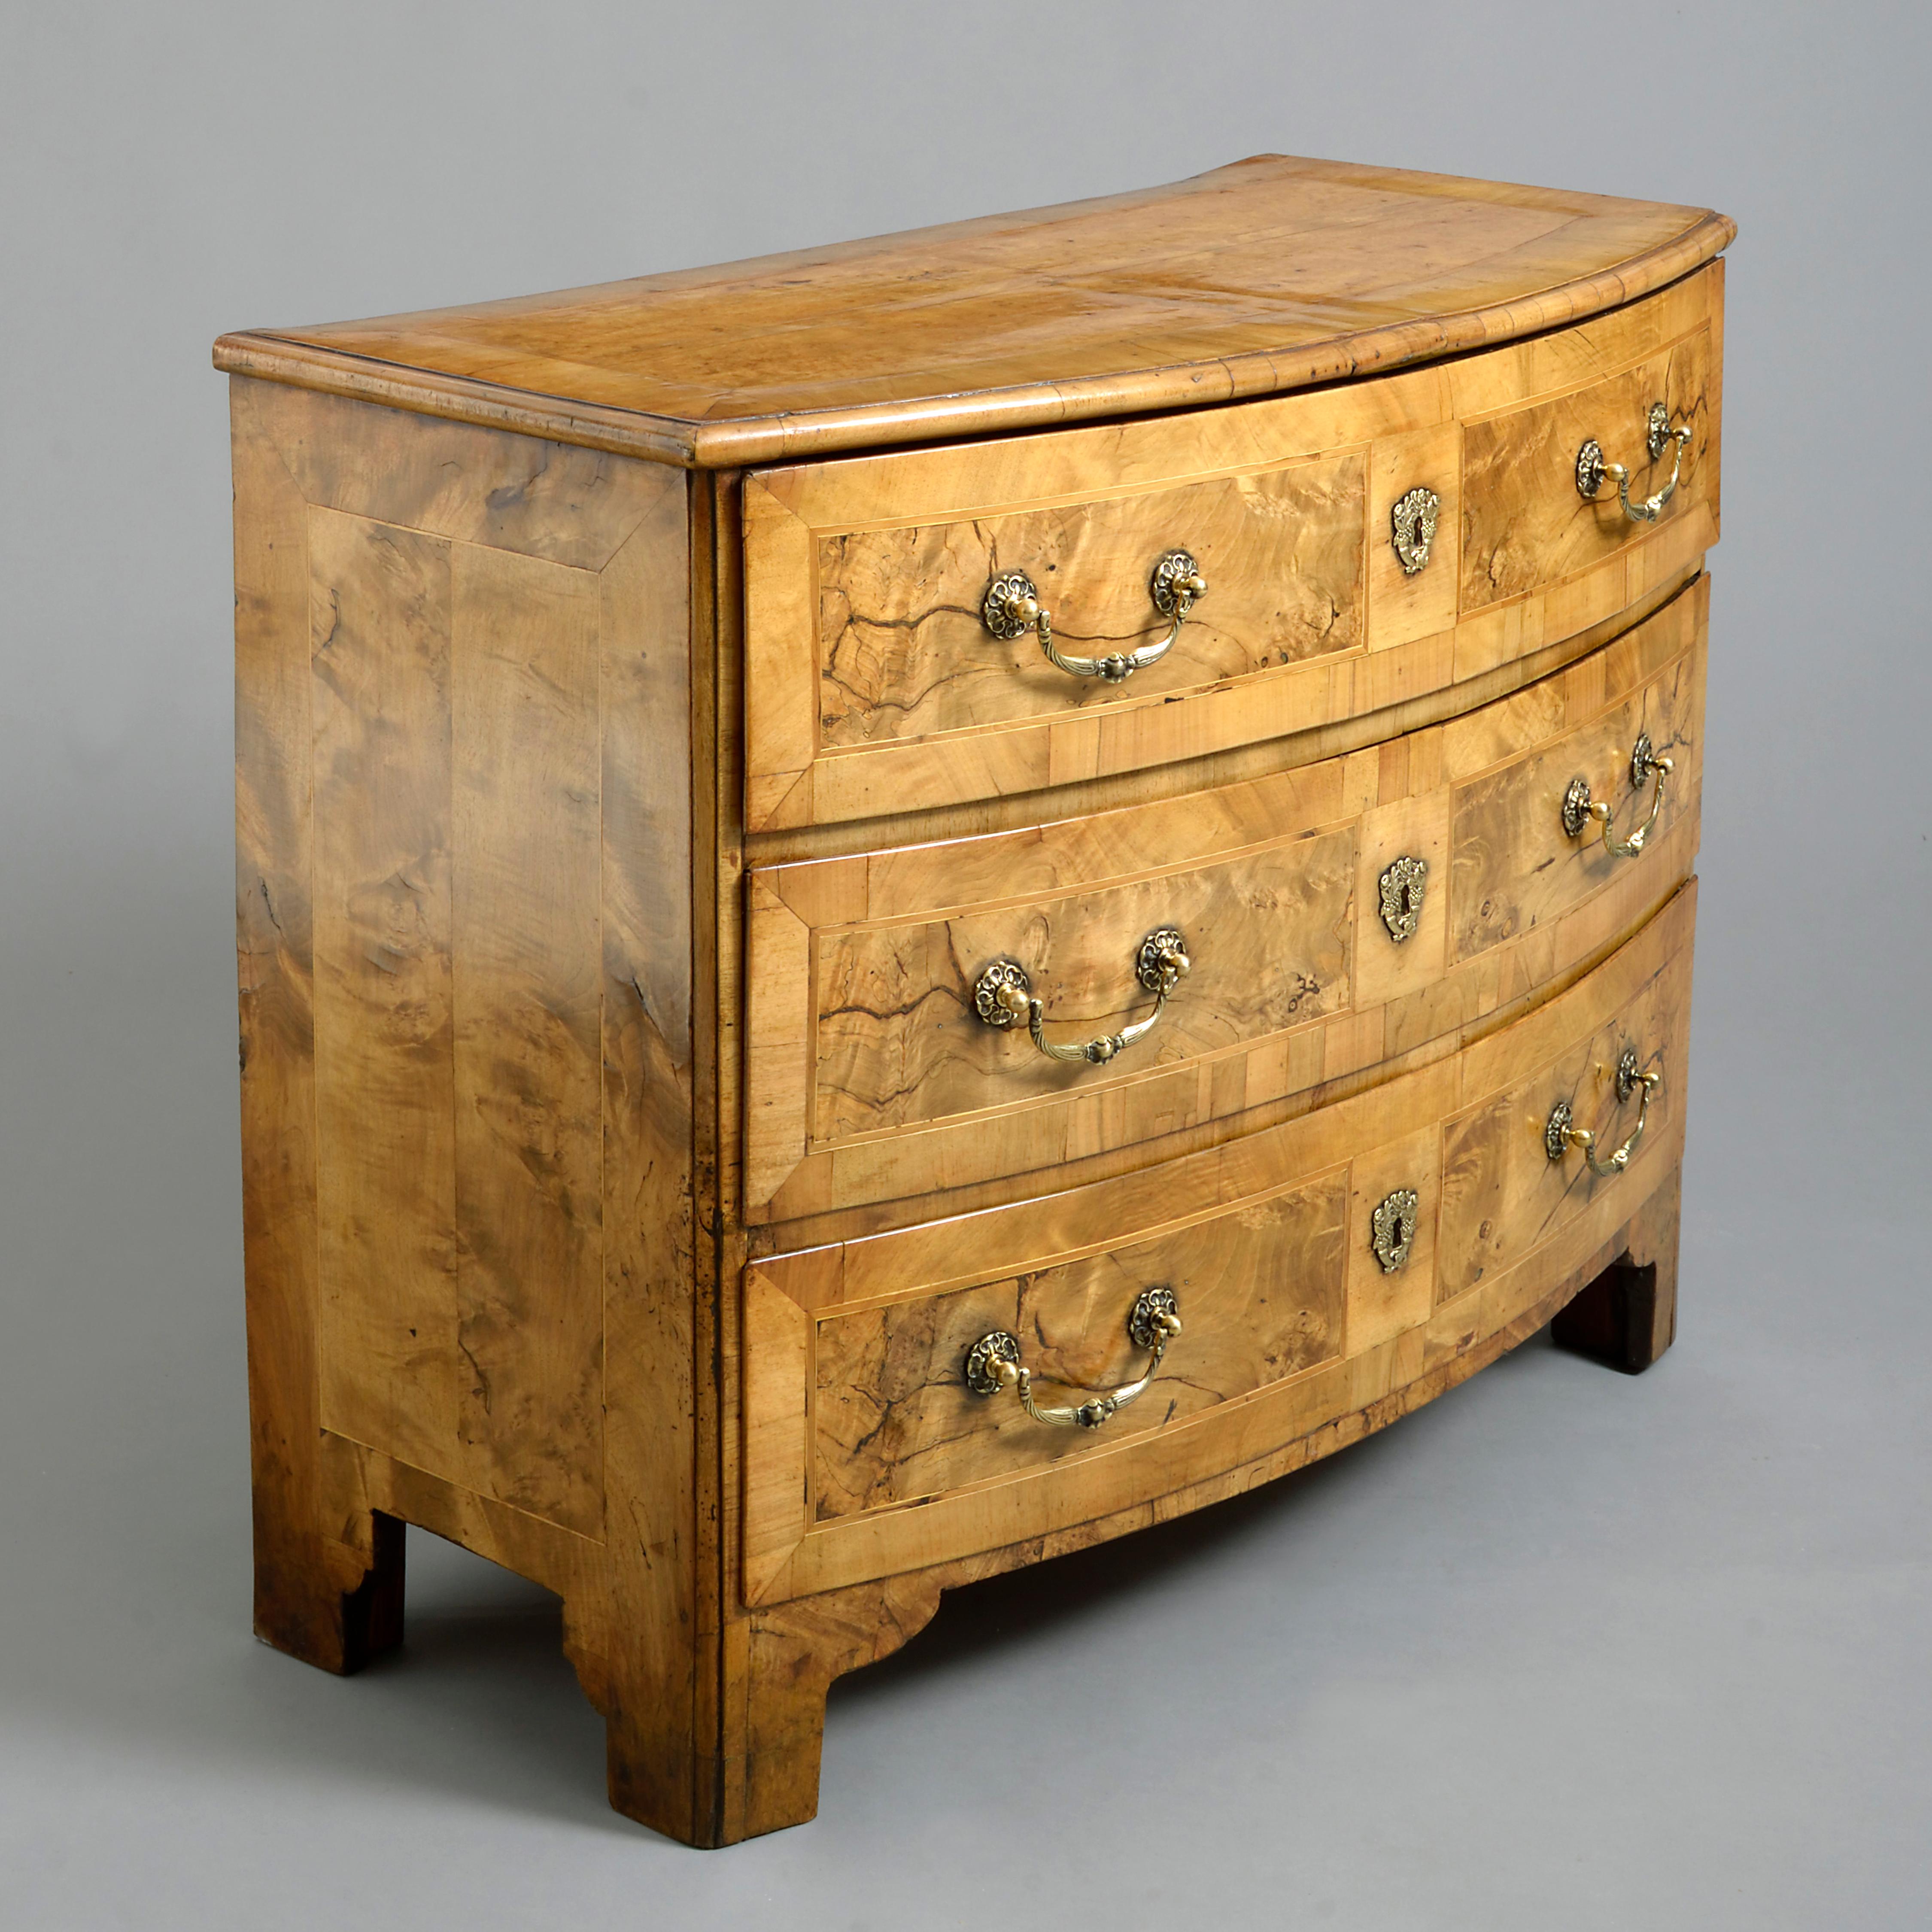 Cross-Banded 18th Century Louis XVI Period Walnut Commode